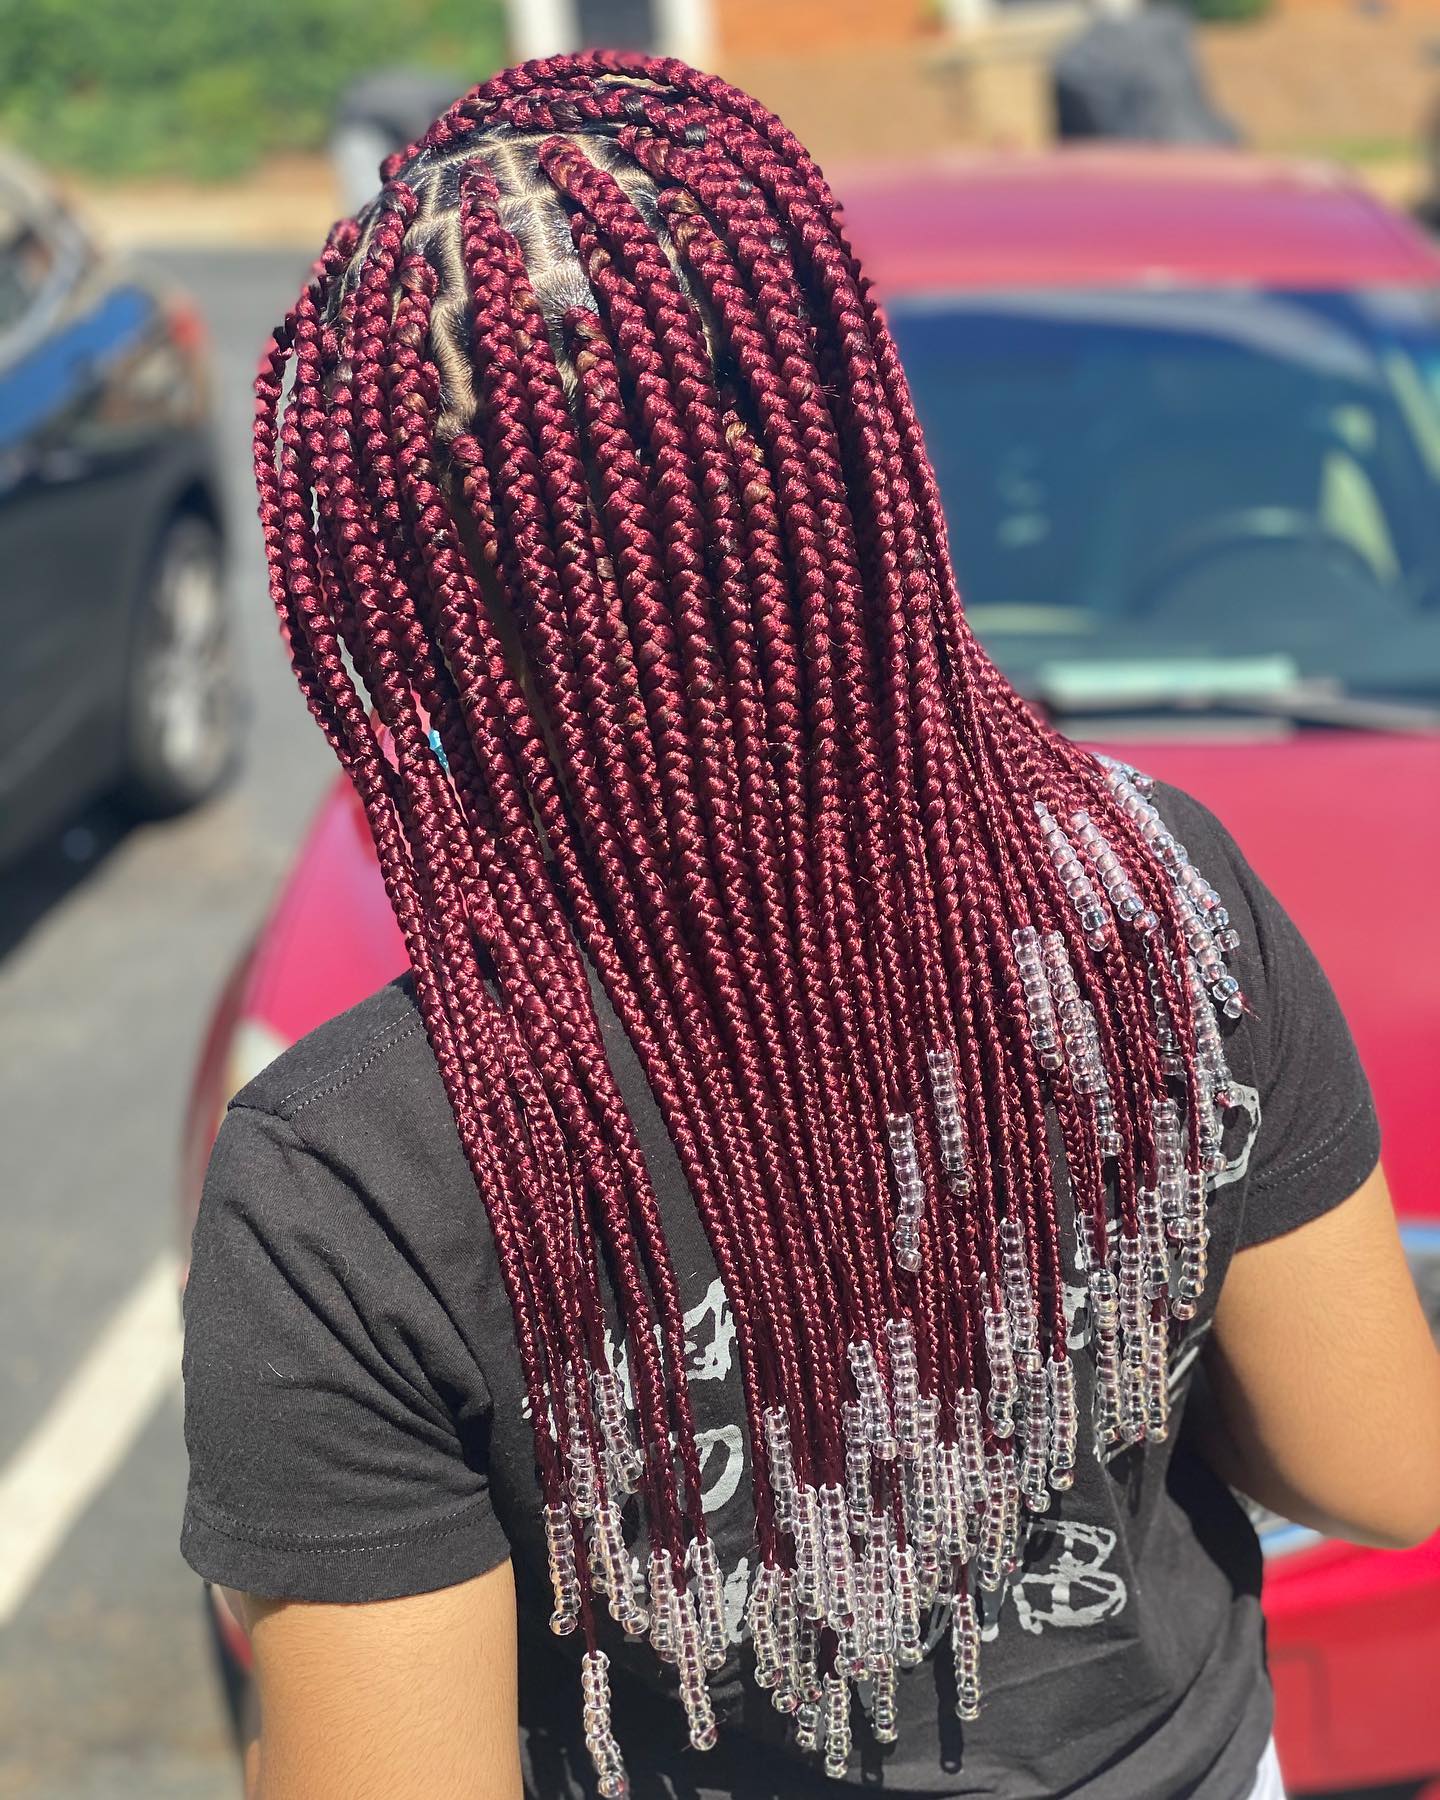 30 Braids With Beads Hairstyles - BraidHairstyles.com